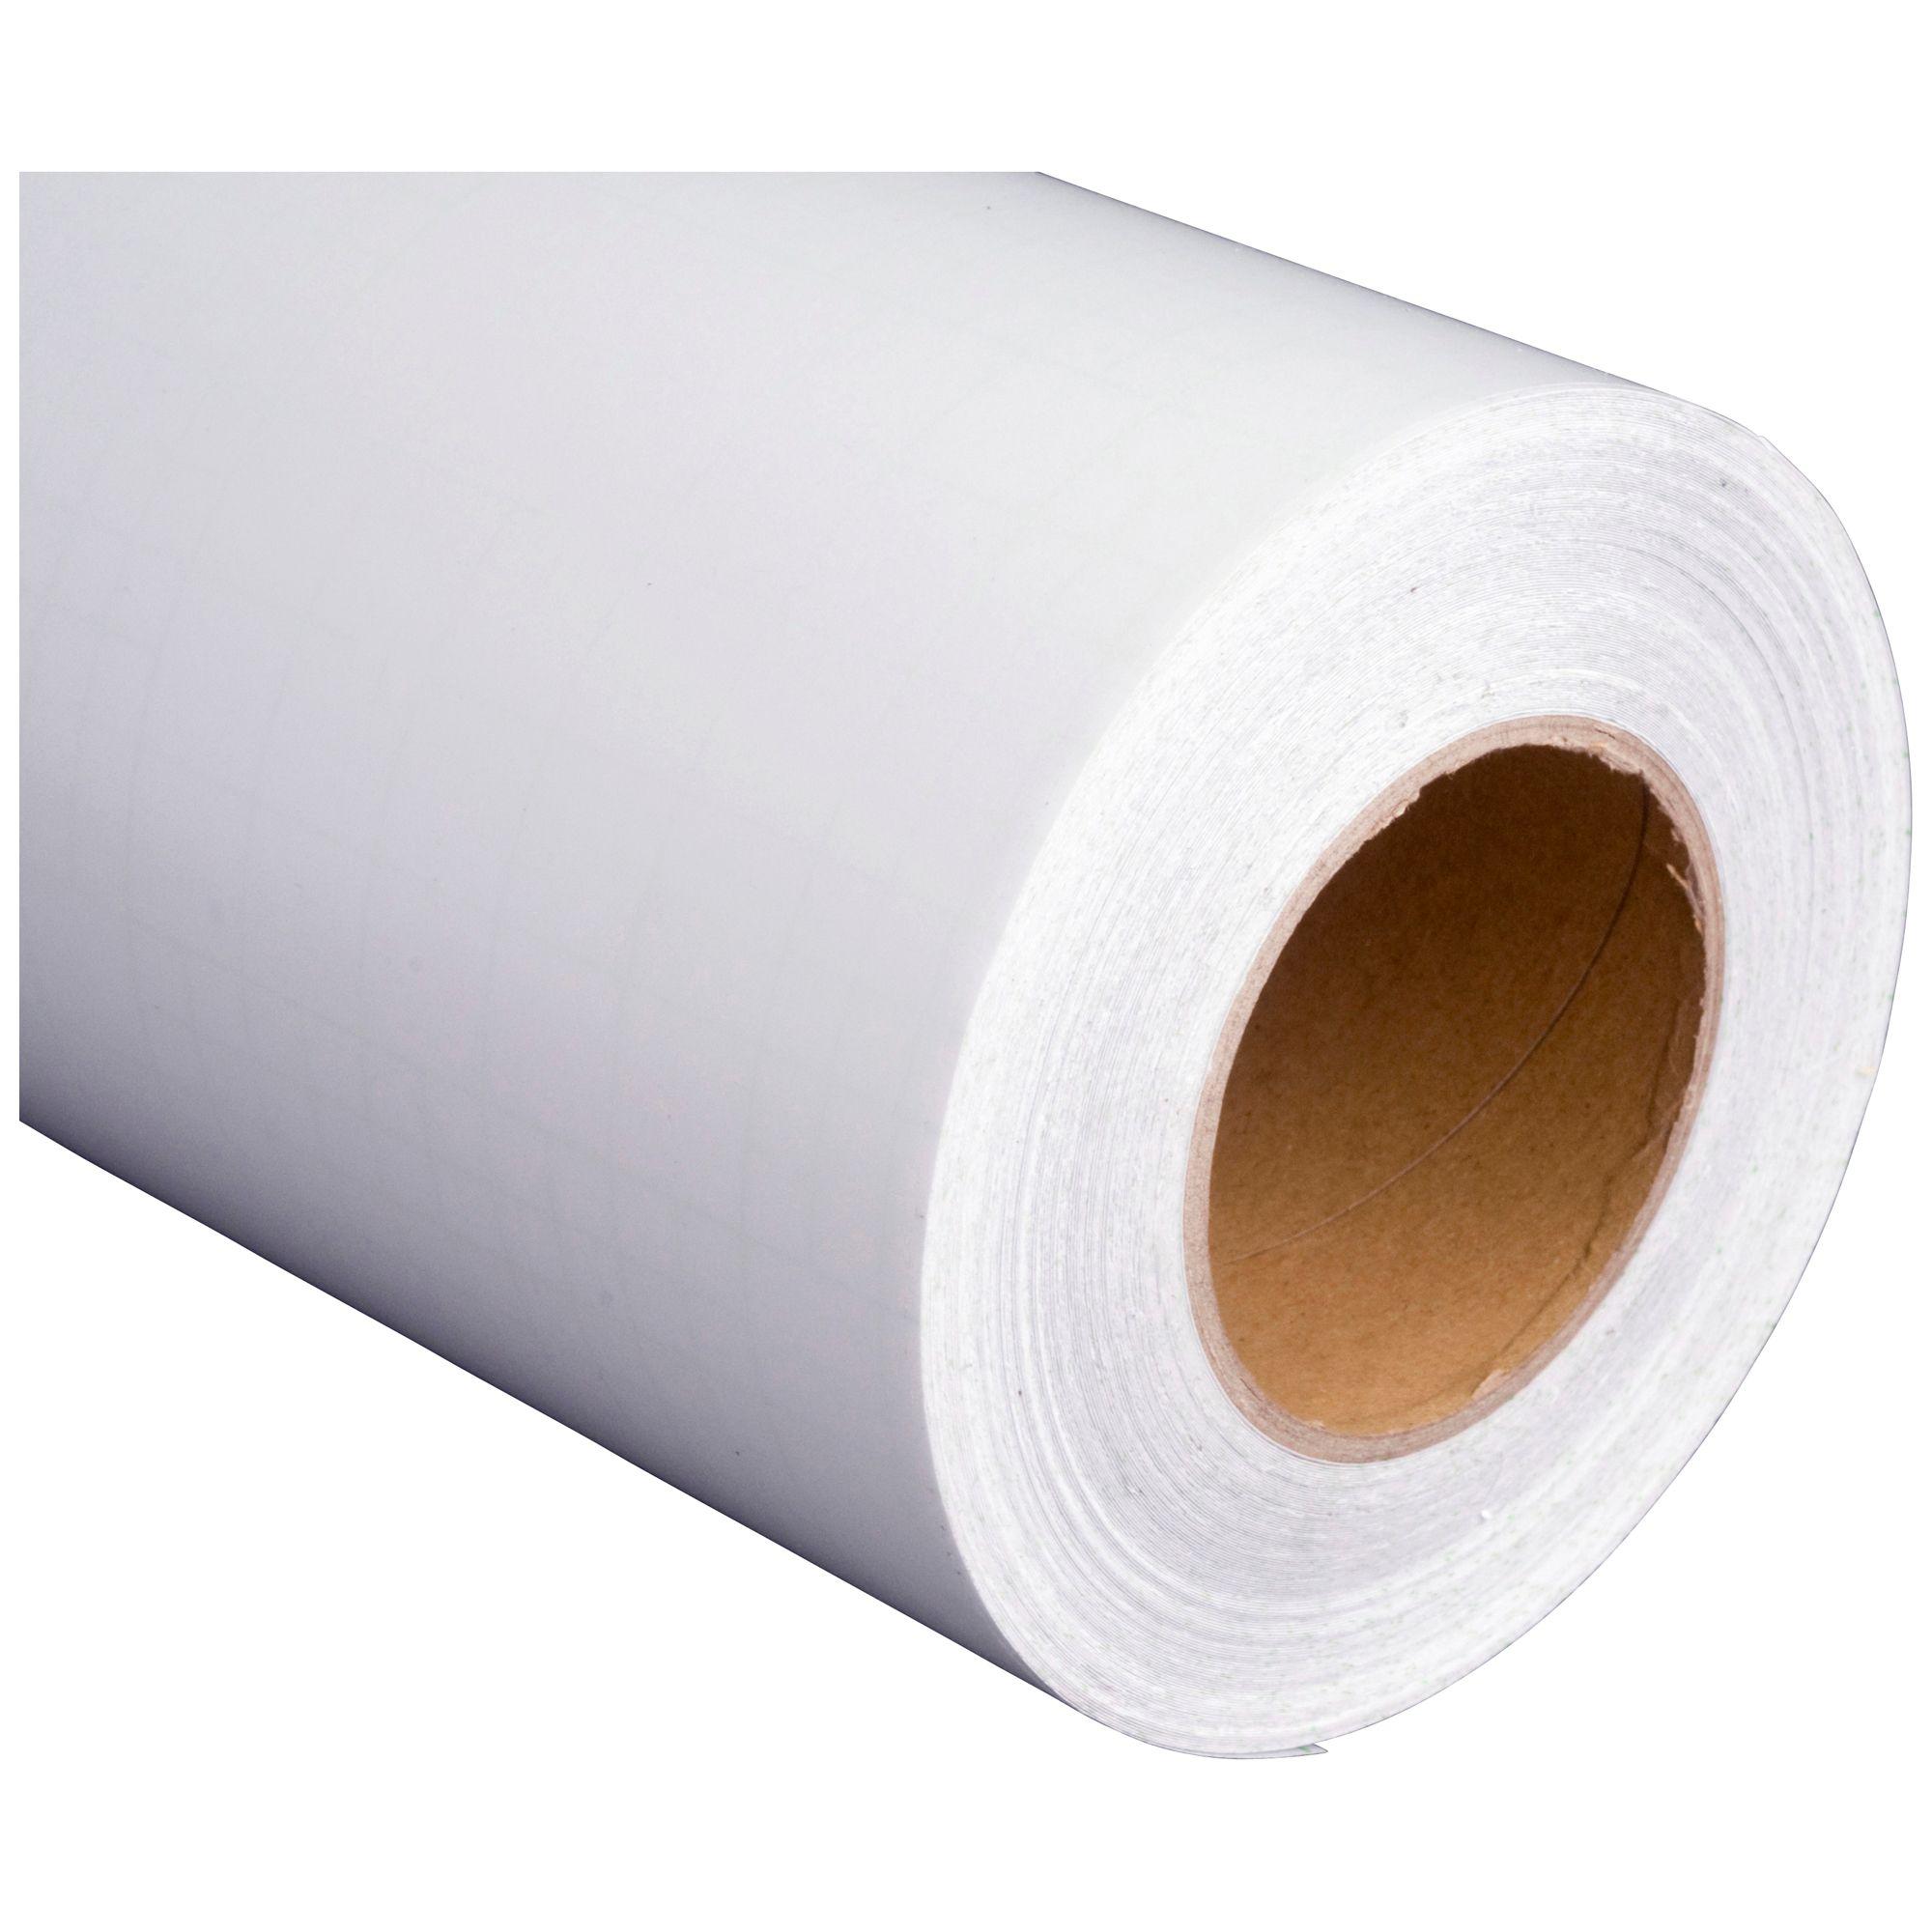 Protective film Soft Water, laminating film